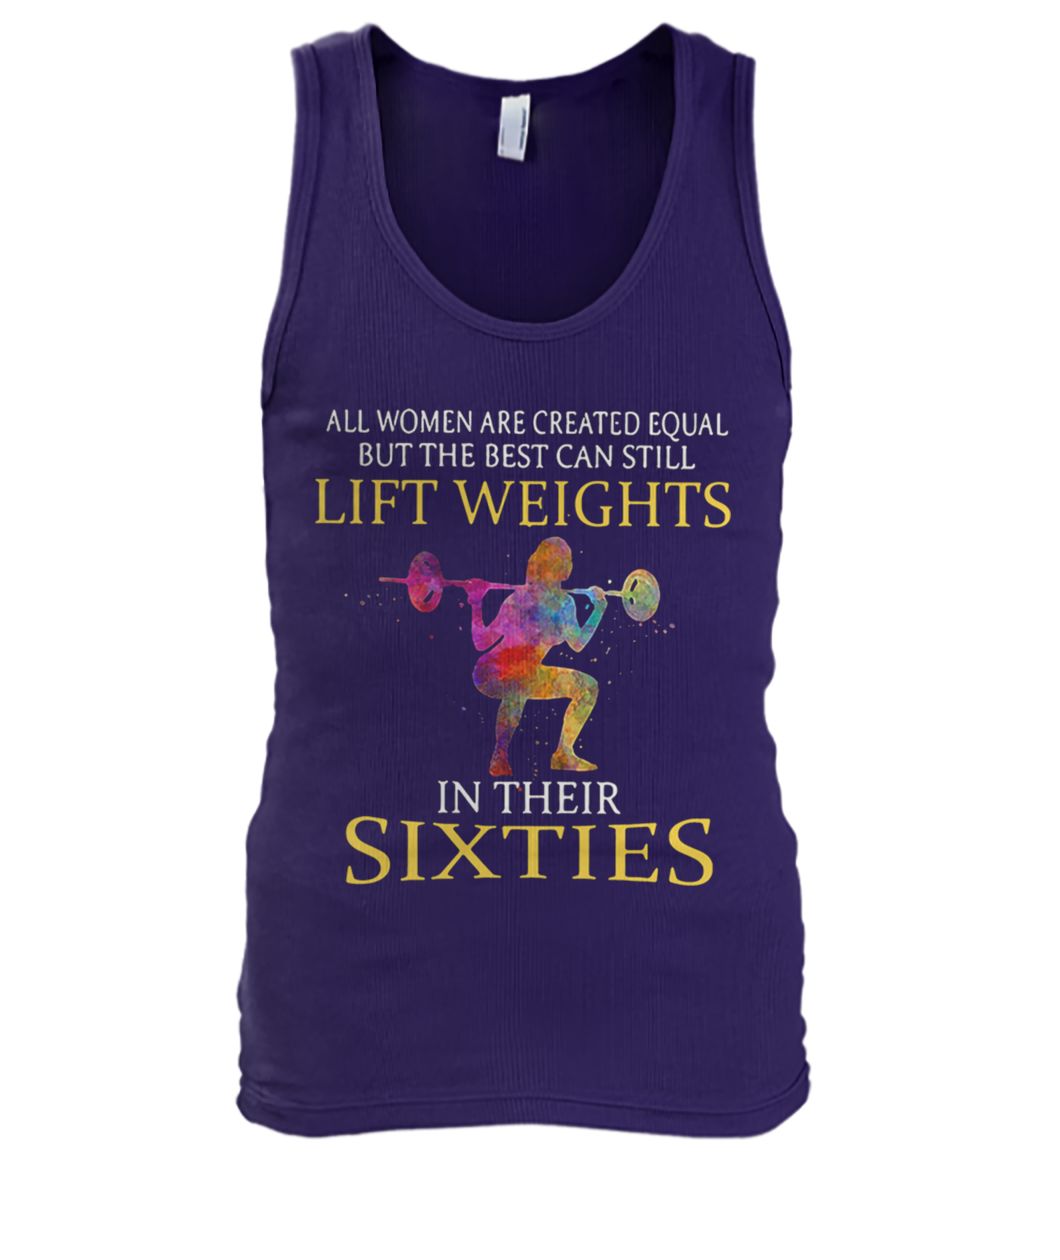 All women are created equal but the best can still lift weights in their sixties men's tank top